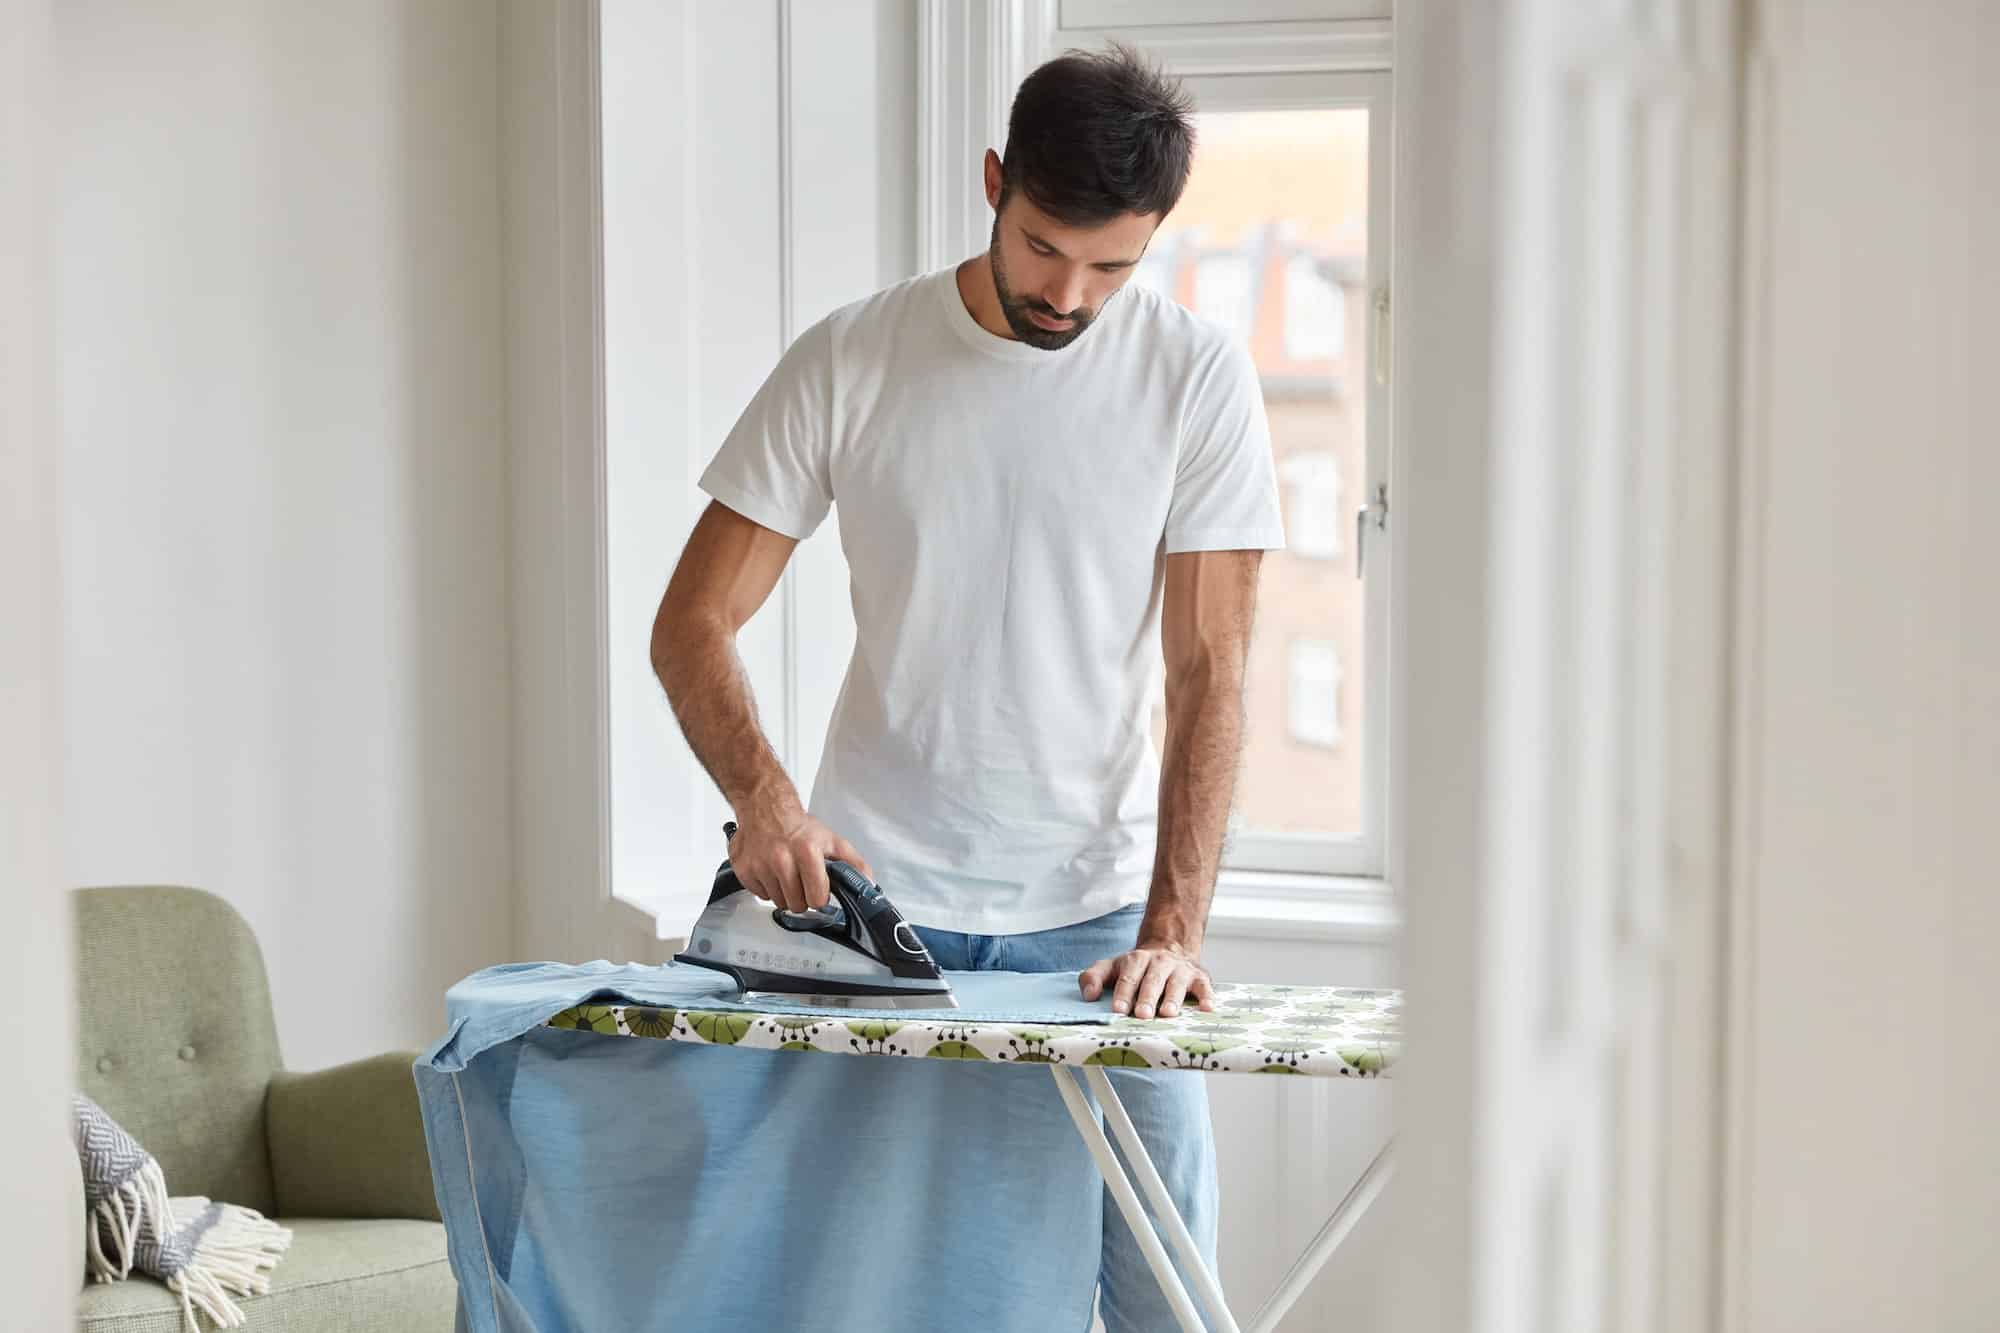 photo of busy unshaven man irons shirt on ironing board prepares for formal meeting on business con